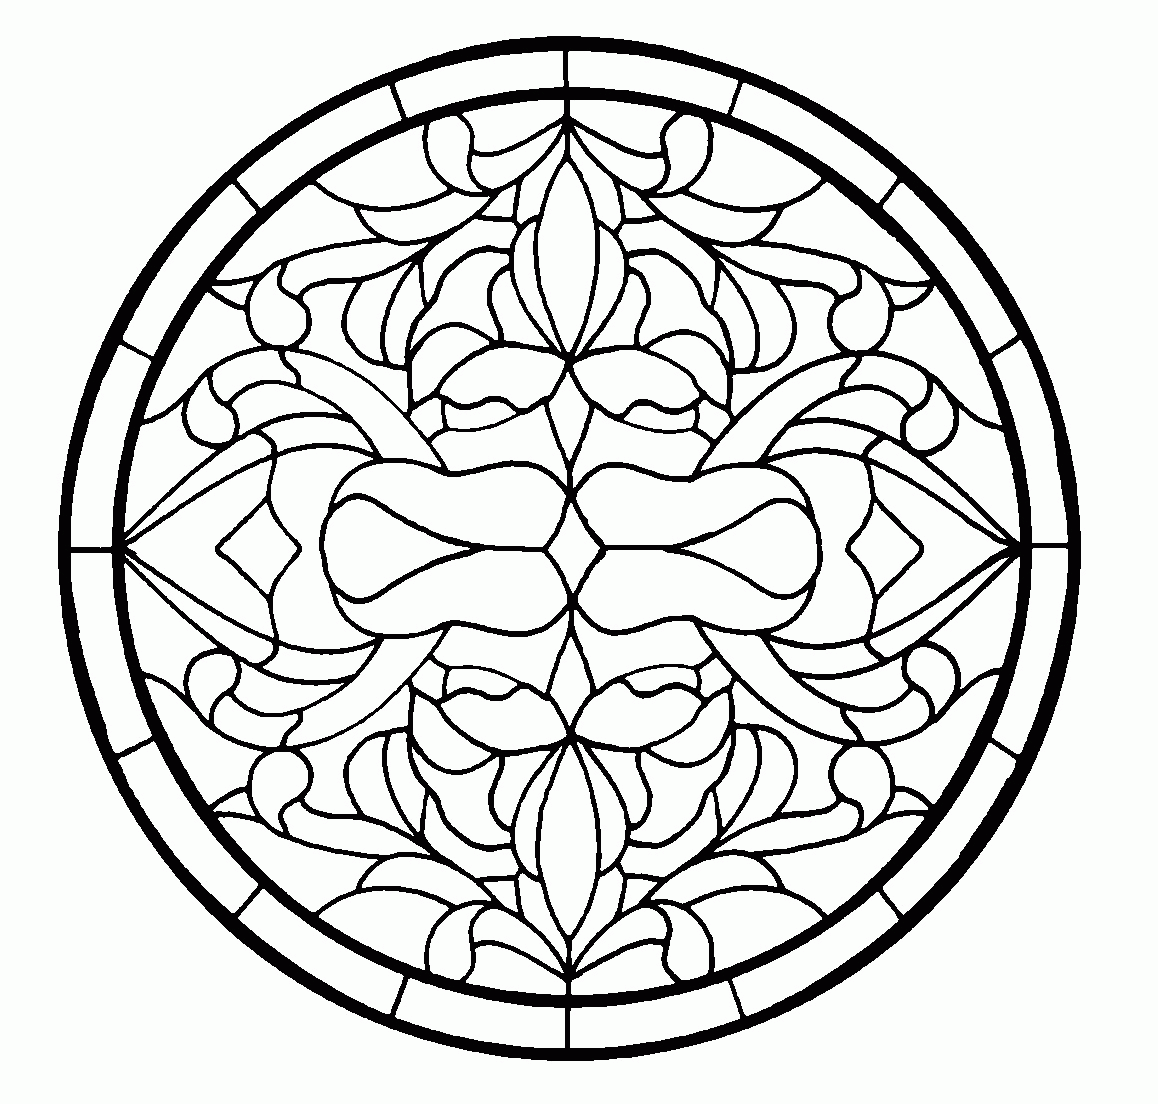 Coloring: Free Roman Mosaic Coloring Pages